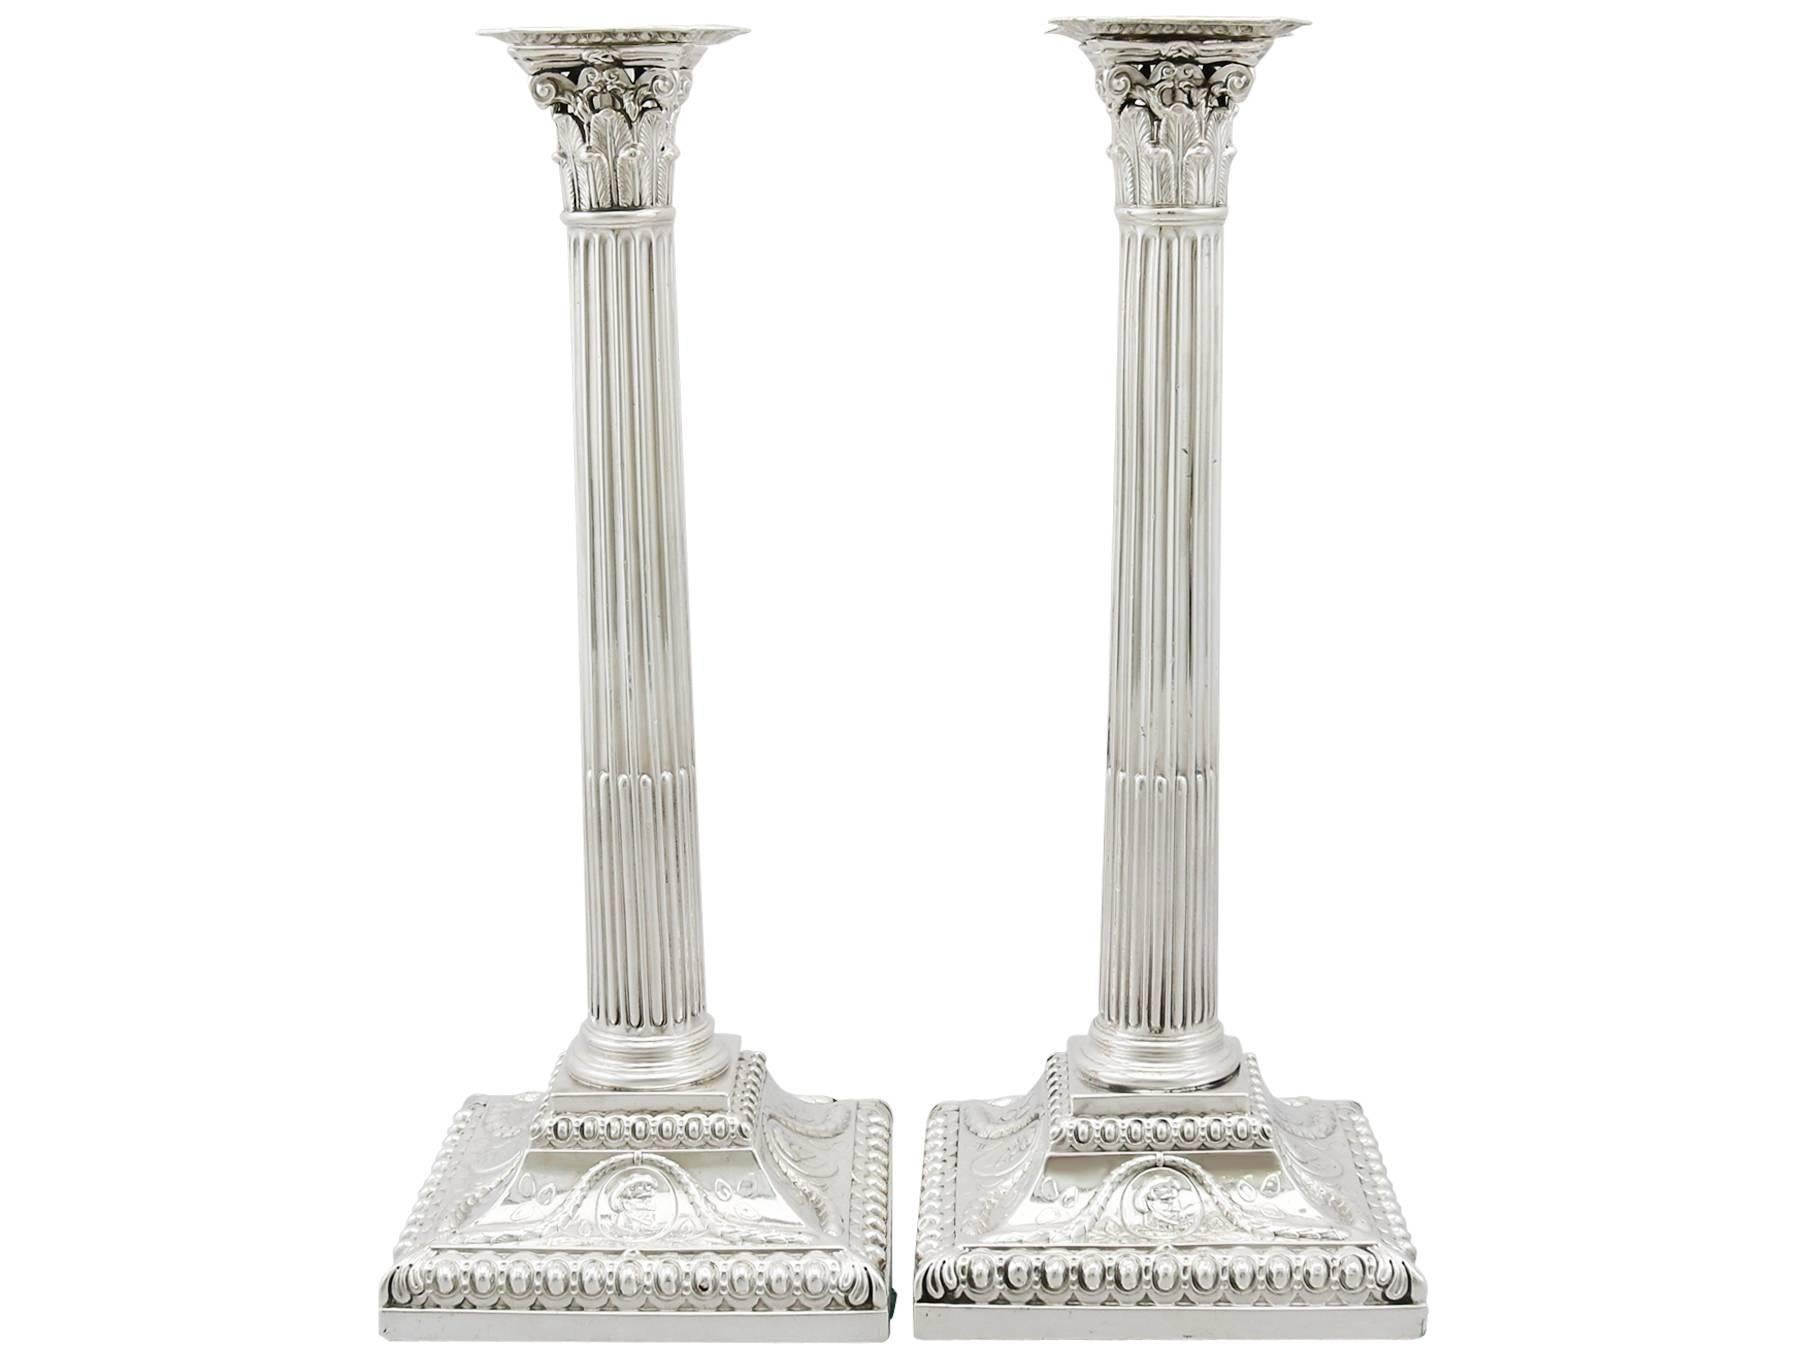 A fine and impressive pair of antique George III English sterling silver Corinthian column candlesticks; part of our ornamental Georgian silverware collection.

These exceptional antique George III sterling silver candlesticks have Corinthian